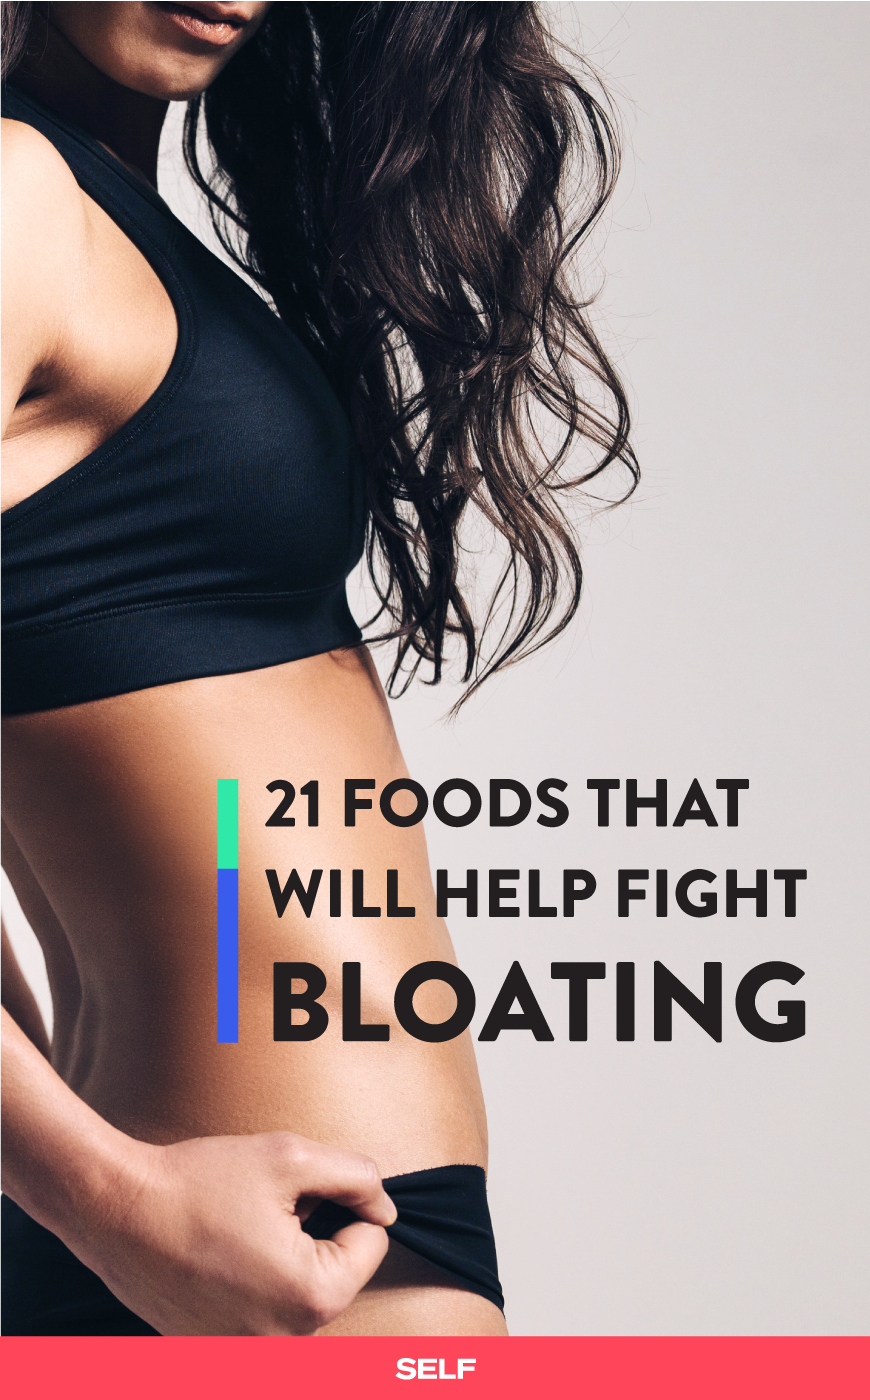 Foods-fight-bloating_pinnable